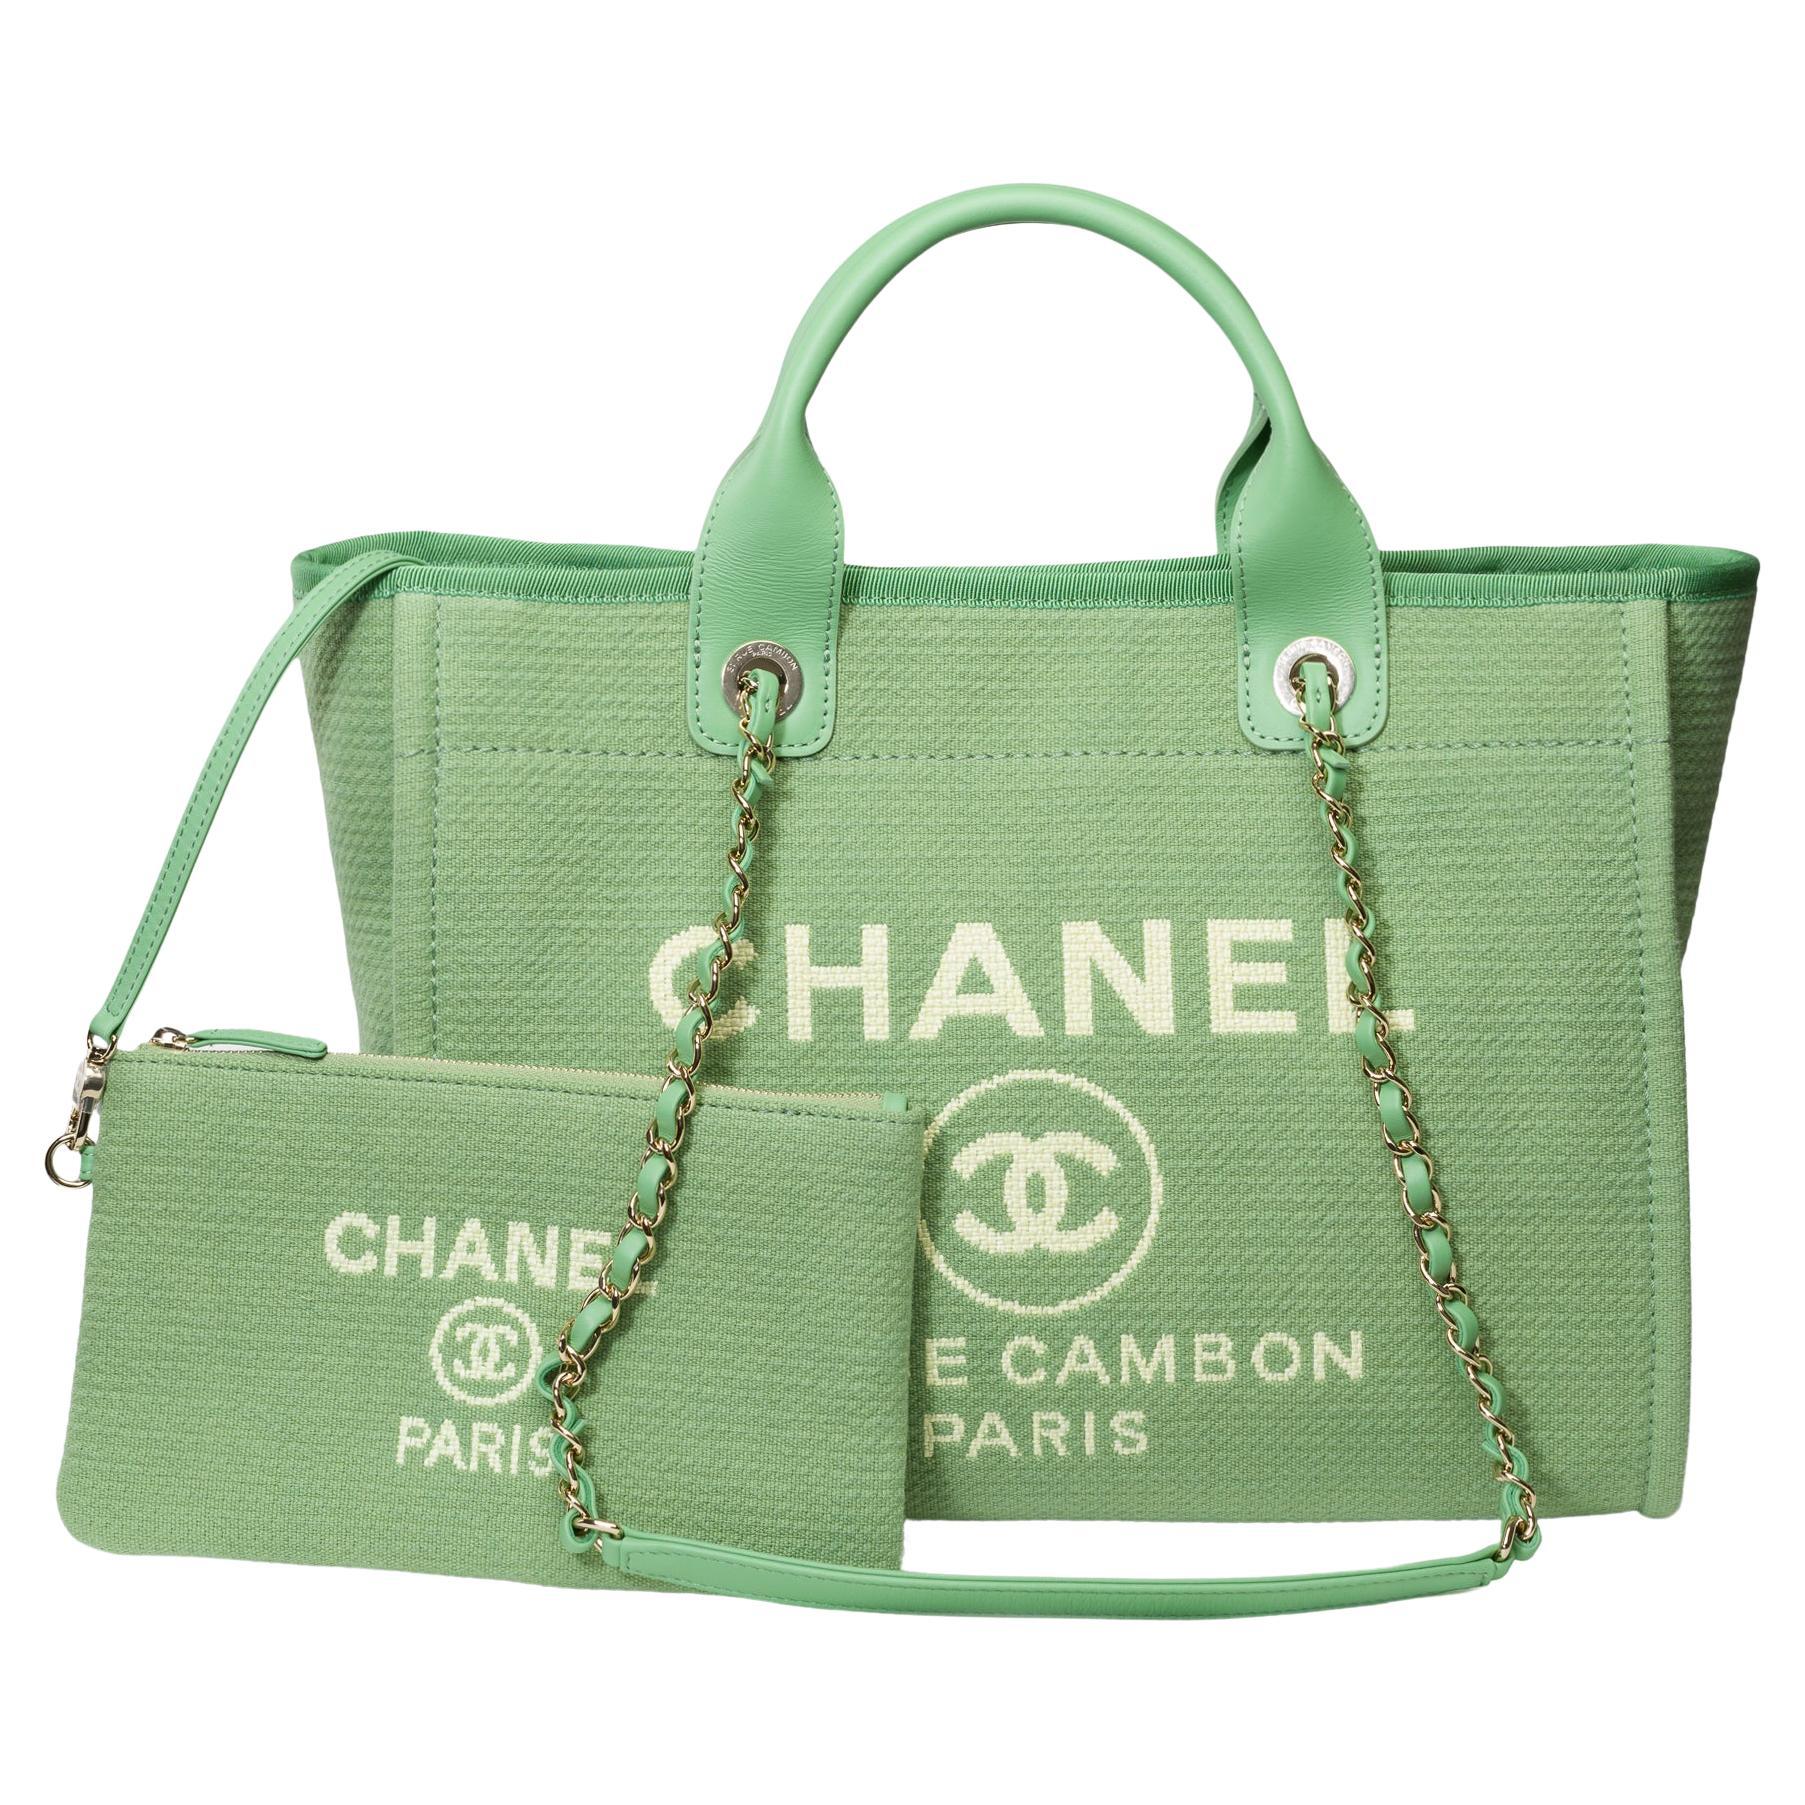 Amazing New limited edition Chanel Deauville tote bag in green canvas, 1 removable pouch in green canvas,  silver metal hardware, a double handle in silver metal interlaced with green leather for a hand and shoulder carry

Closure by double silver